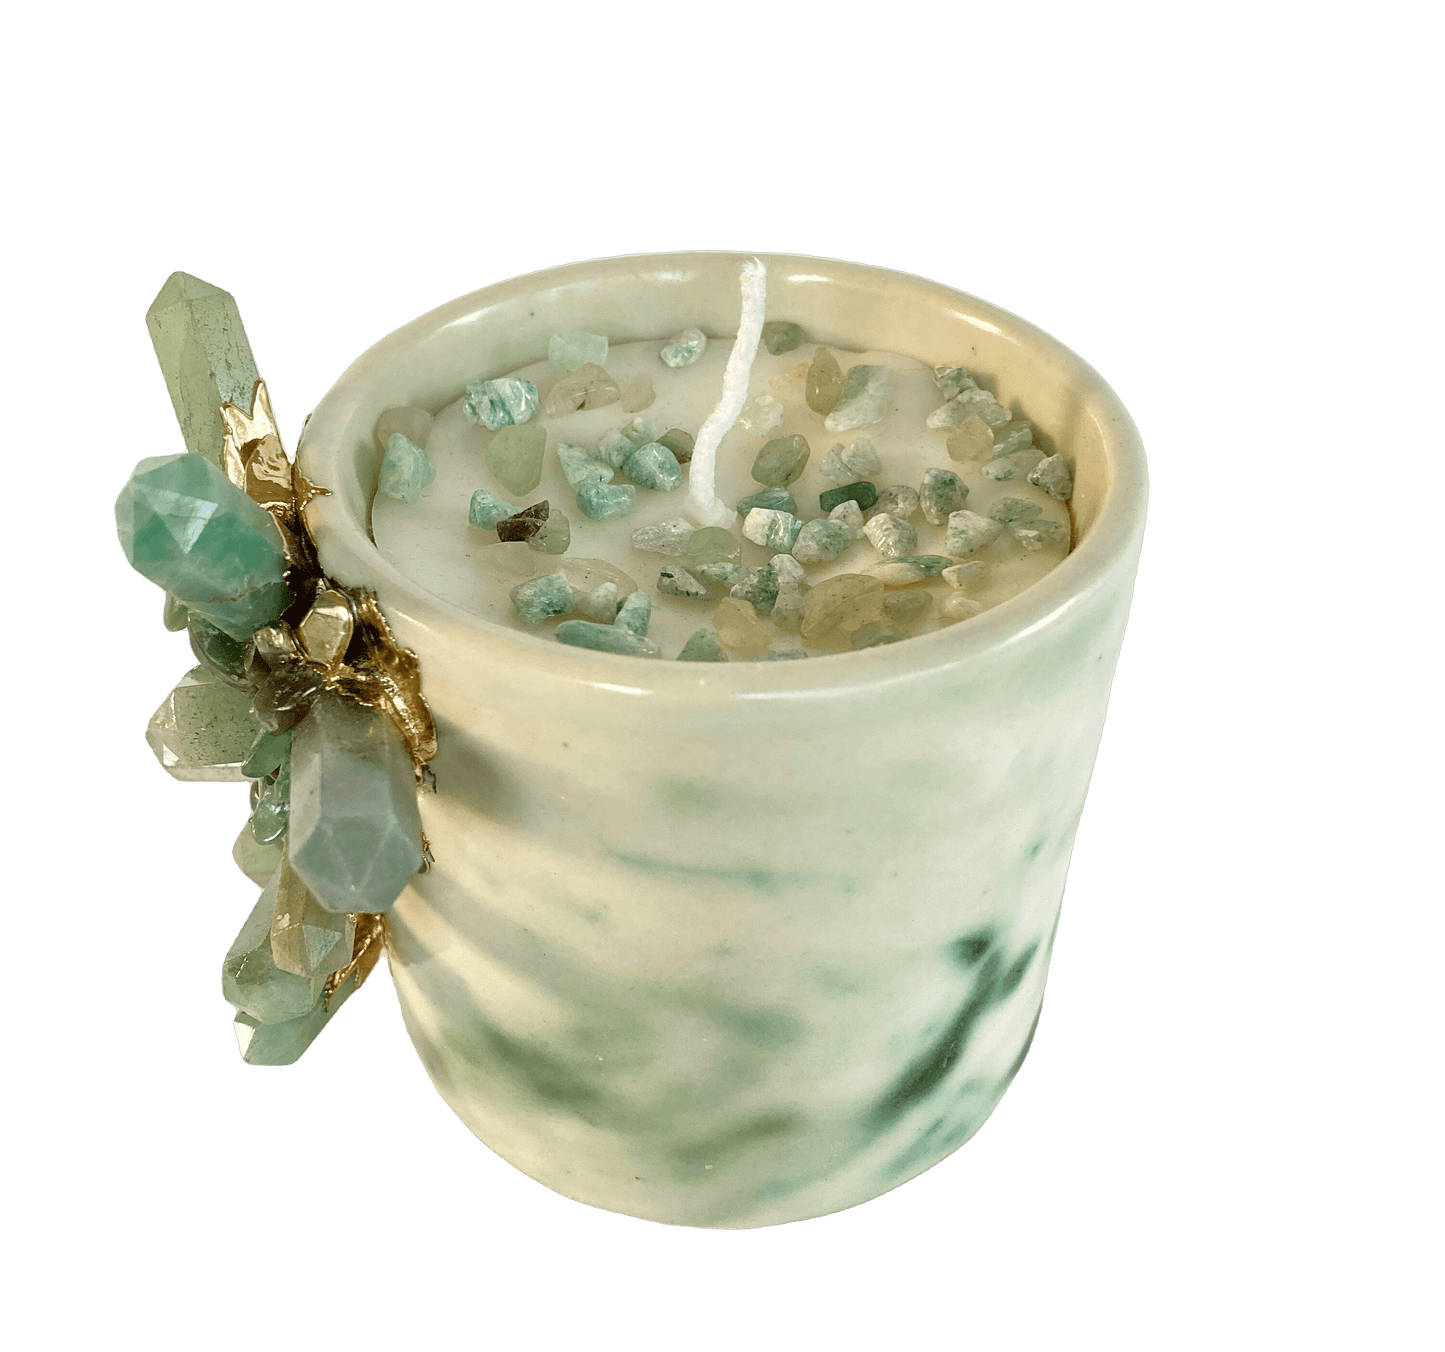 Green Quartz Crystal Scented Soy Candles in Coffee Mug - Set of 2 - MAIA HOMES